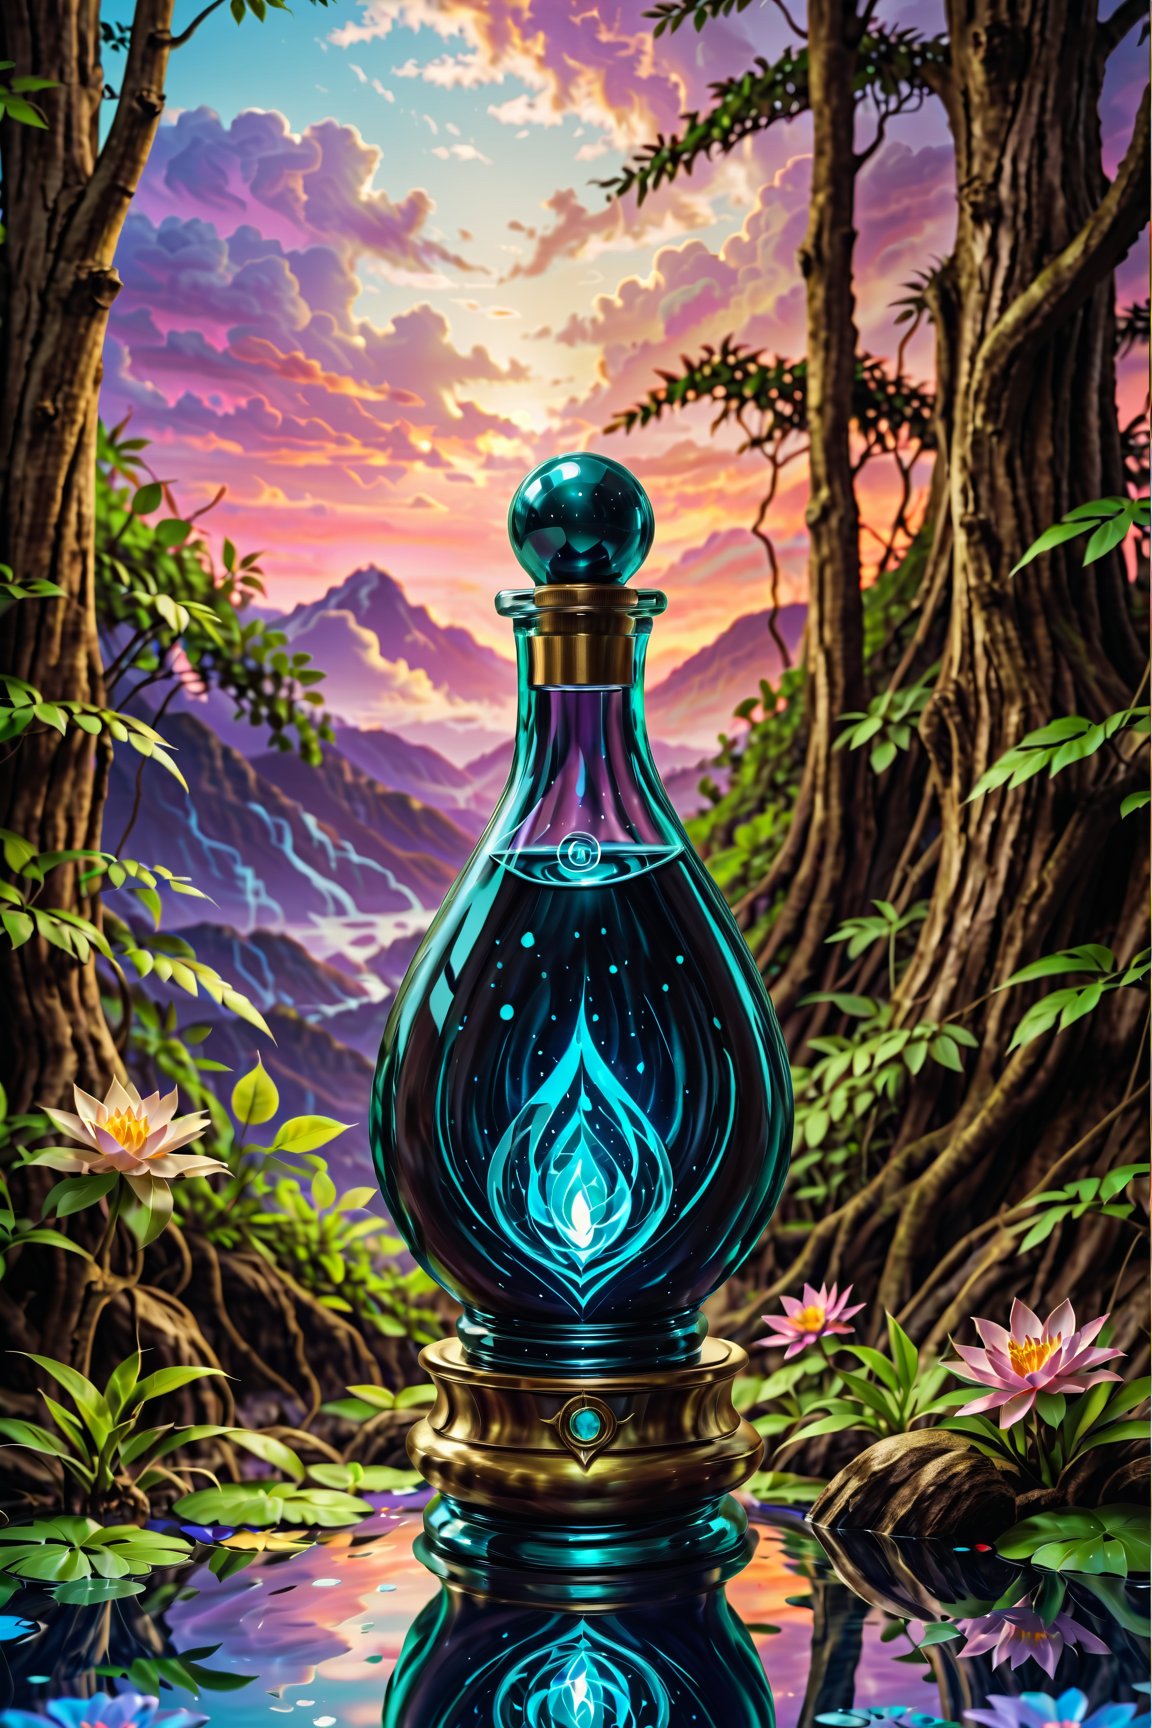 Potion of Eternal Youth: "Design a potion of luminous, pearlescent liquid, in an elegantly shaped bottle with eternal youth runes. The backdrop is a vibrant, ageless utopia, reflecting the potion's gift of everlasting youth and beauty."

